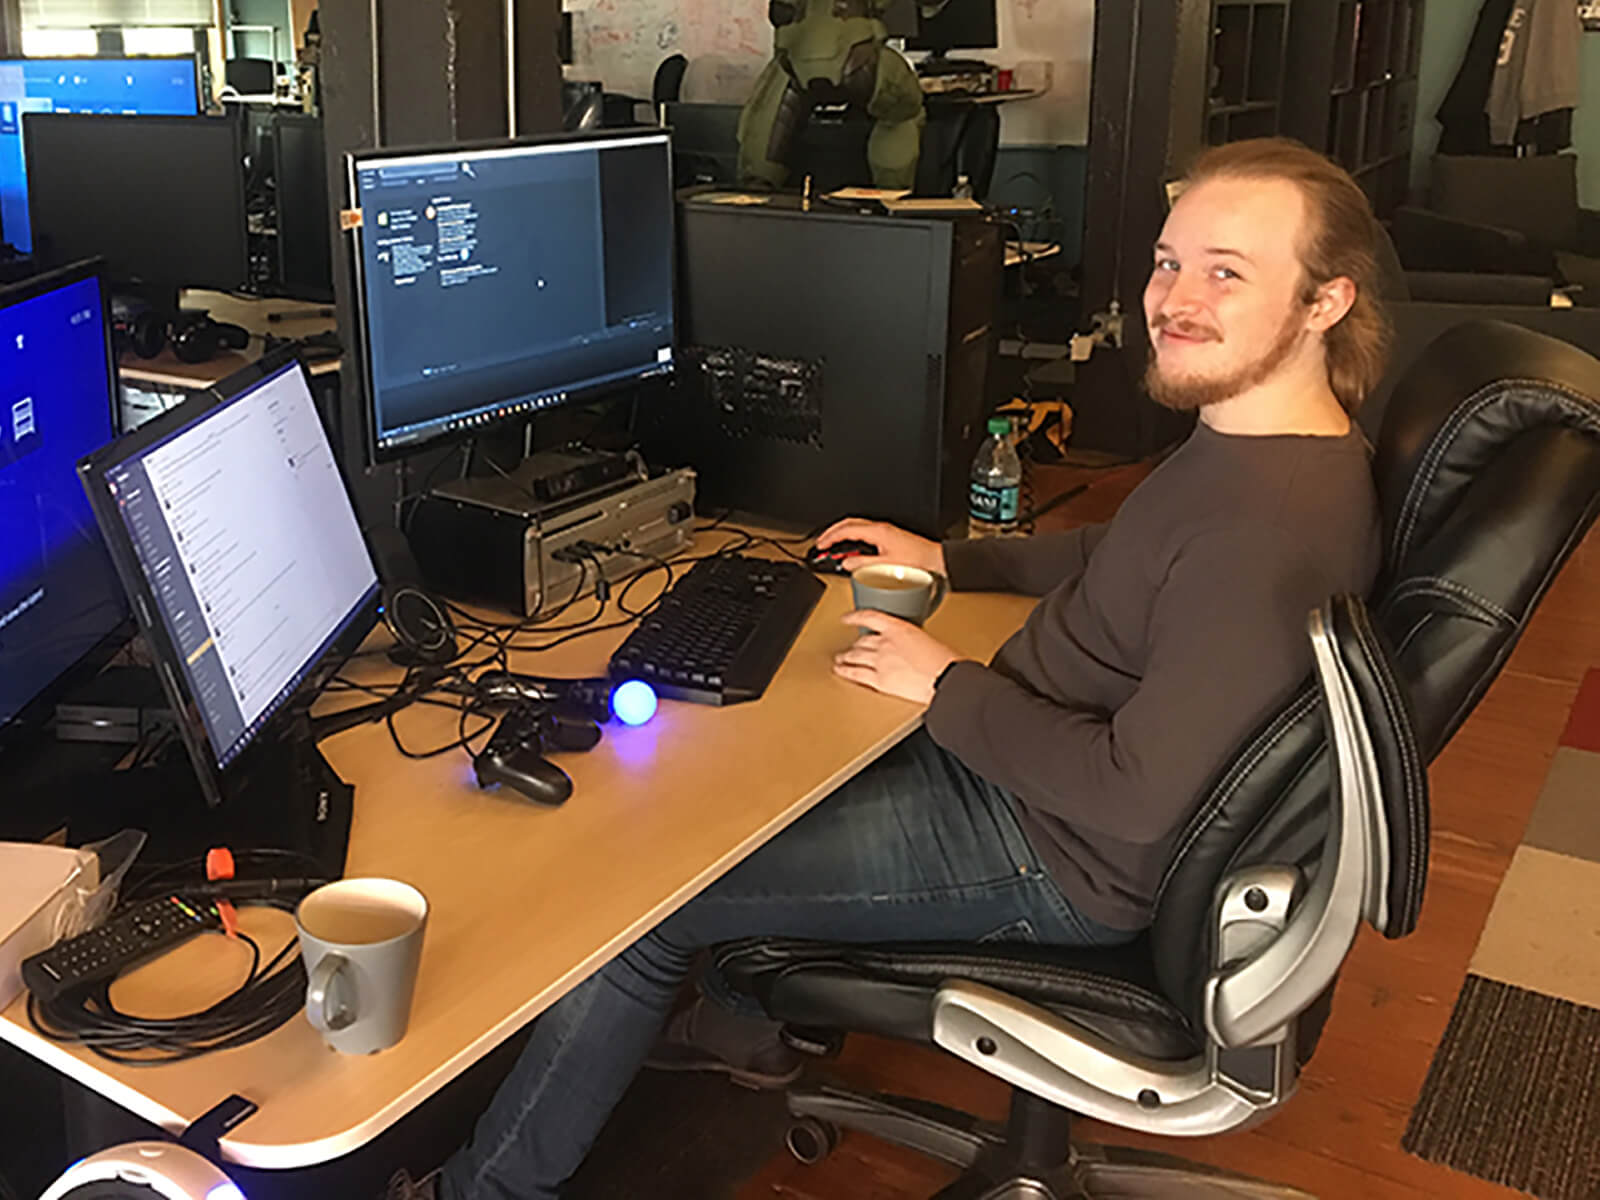 DigiPen alumnus Ian Shores sits at his desk at the Highwire Games office